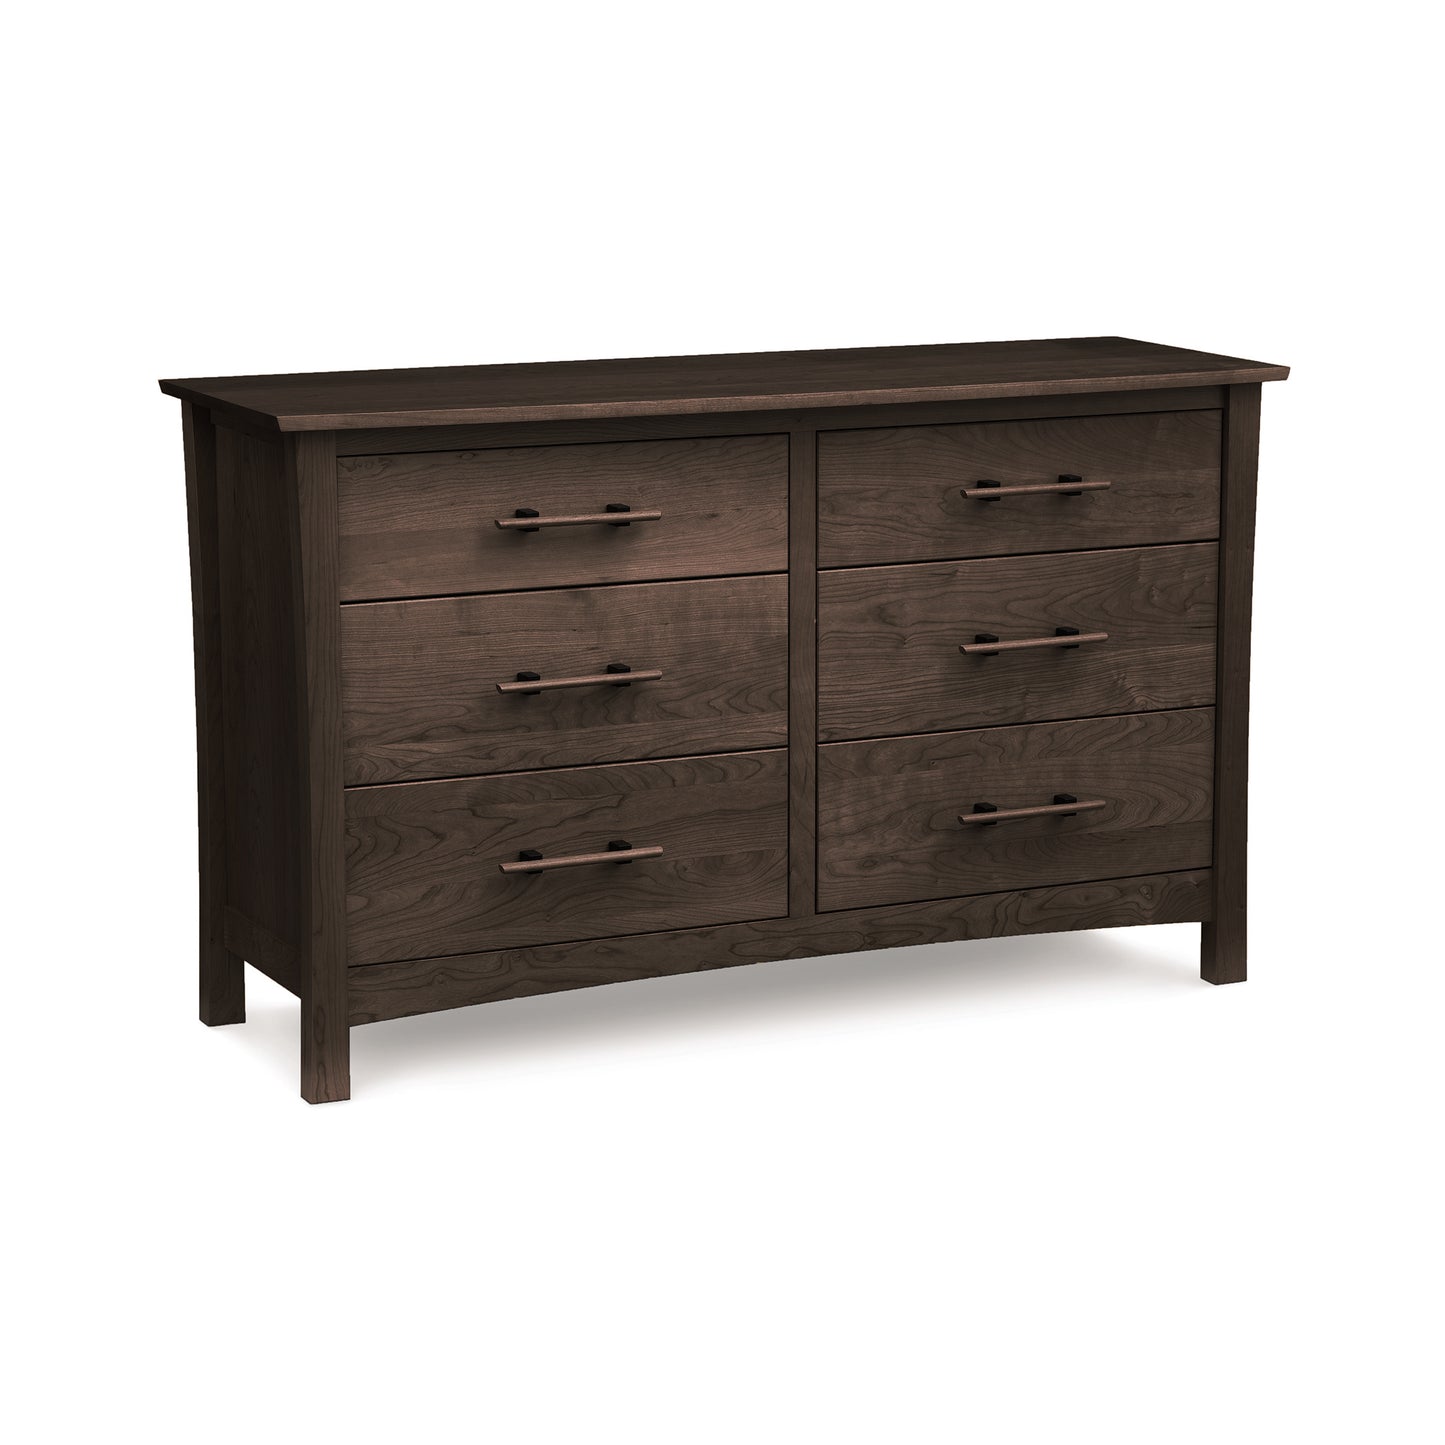 An eco-friendly Copeland Furniture Monterey 6-Drawer Dresser made of cherry wood in a dark finish with simple, linear handles on a white background.